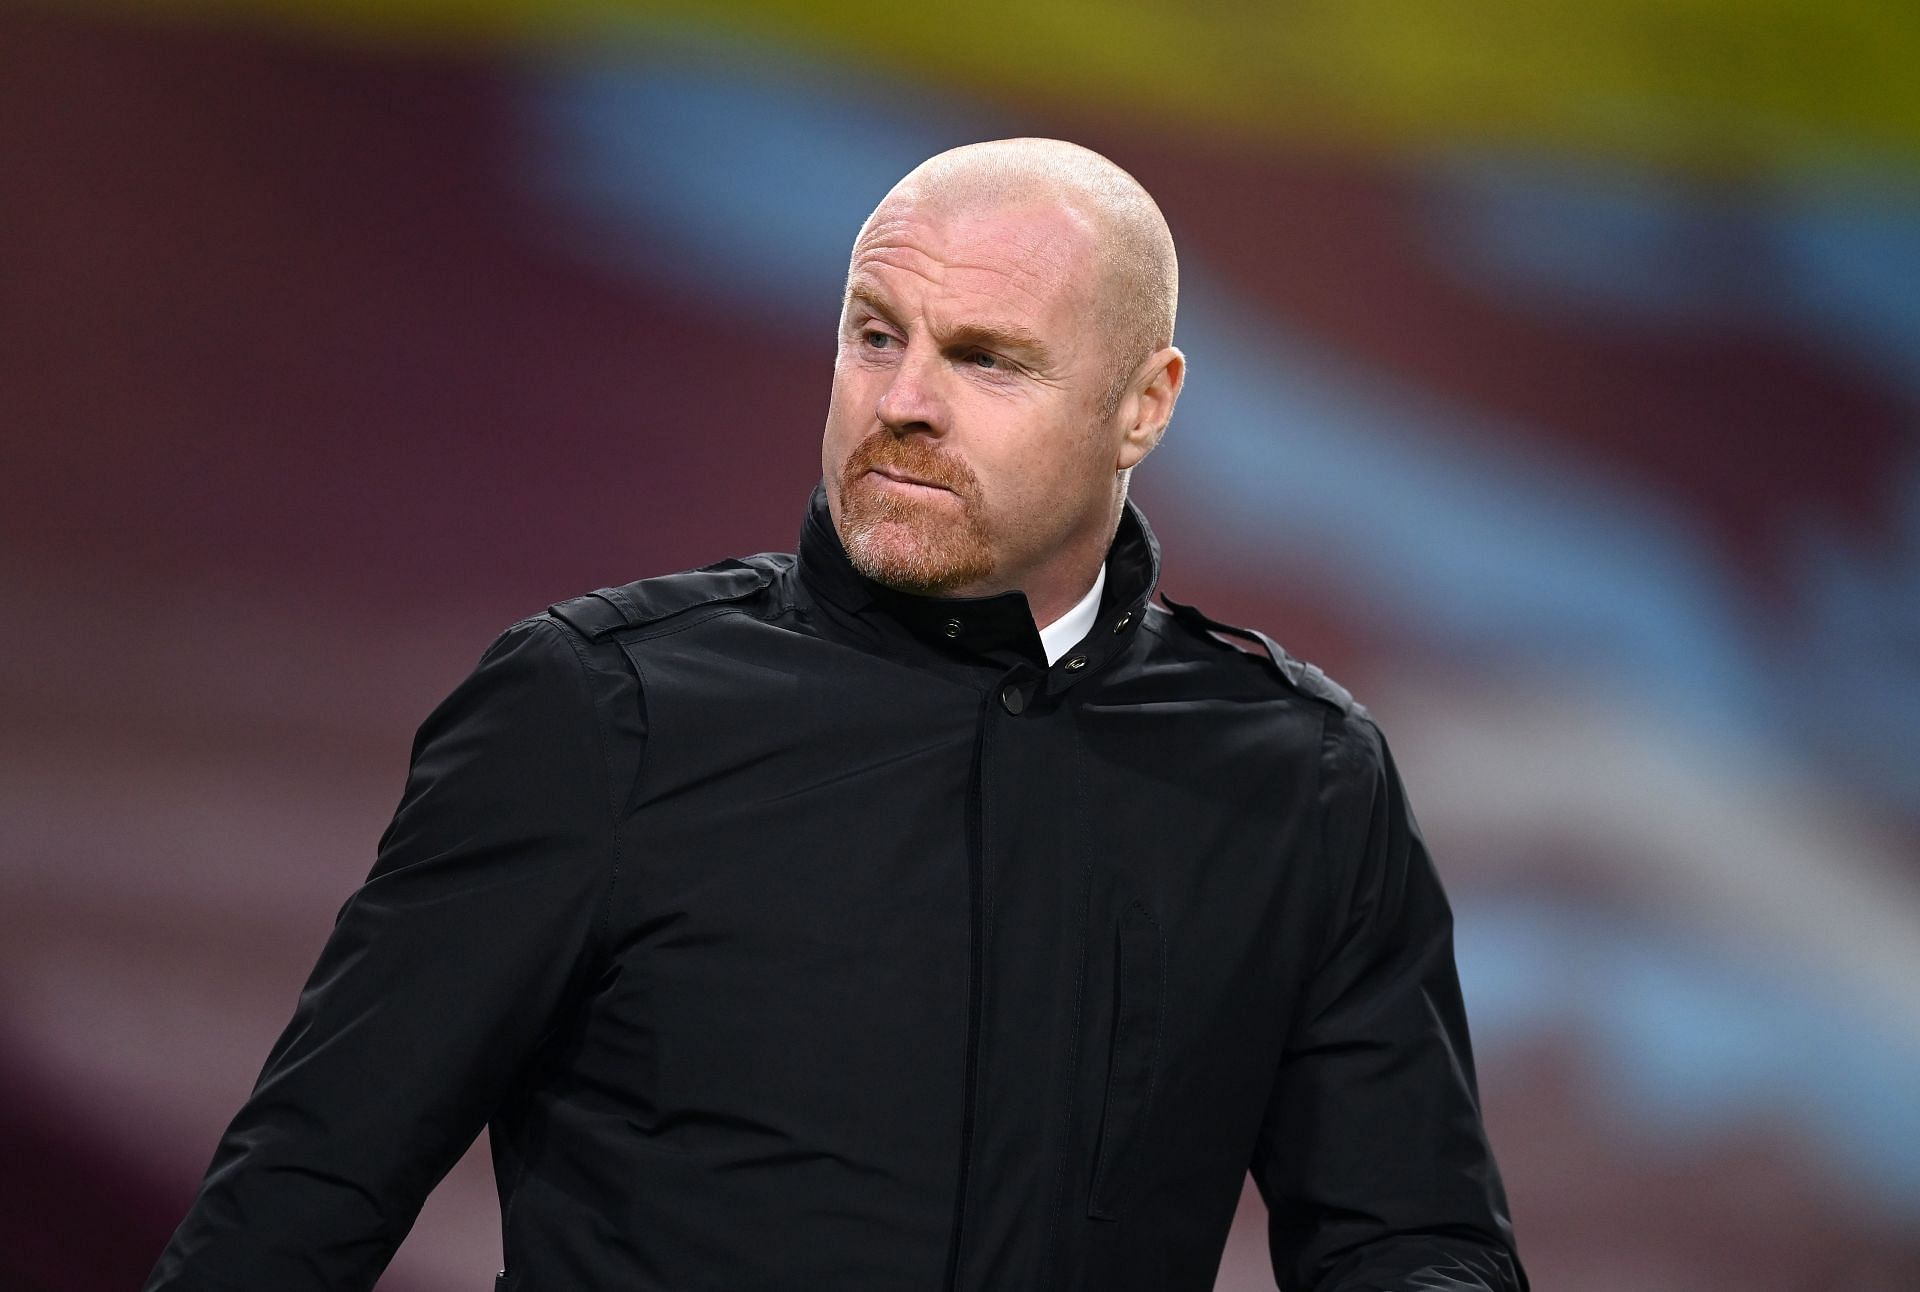 Sean Dyche has done consistently well with Burnley